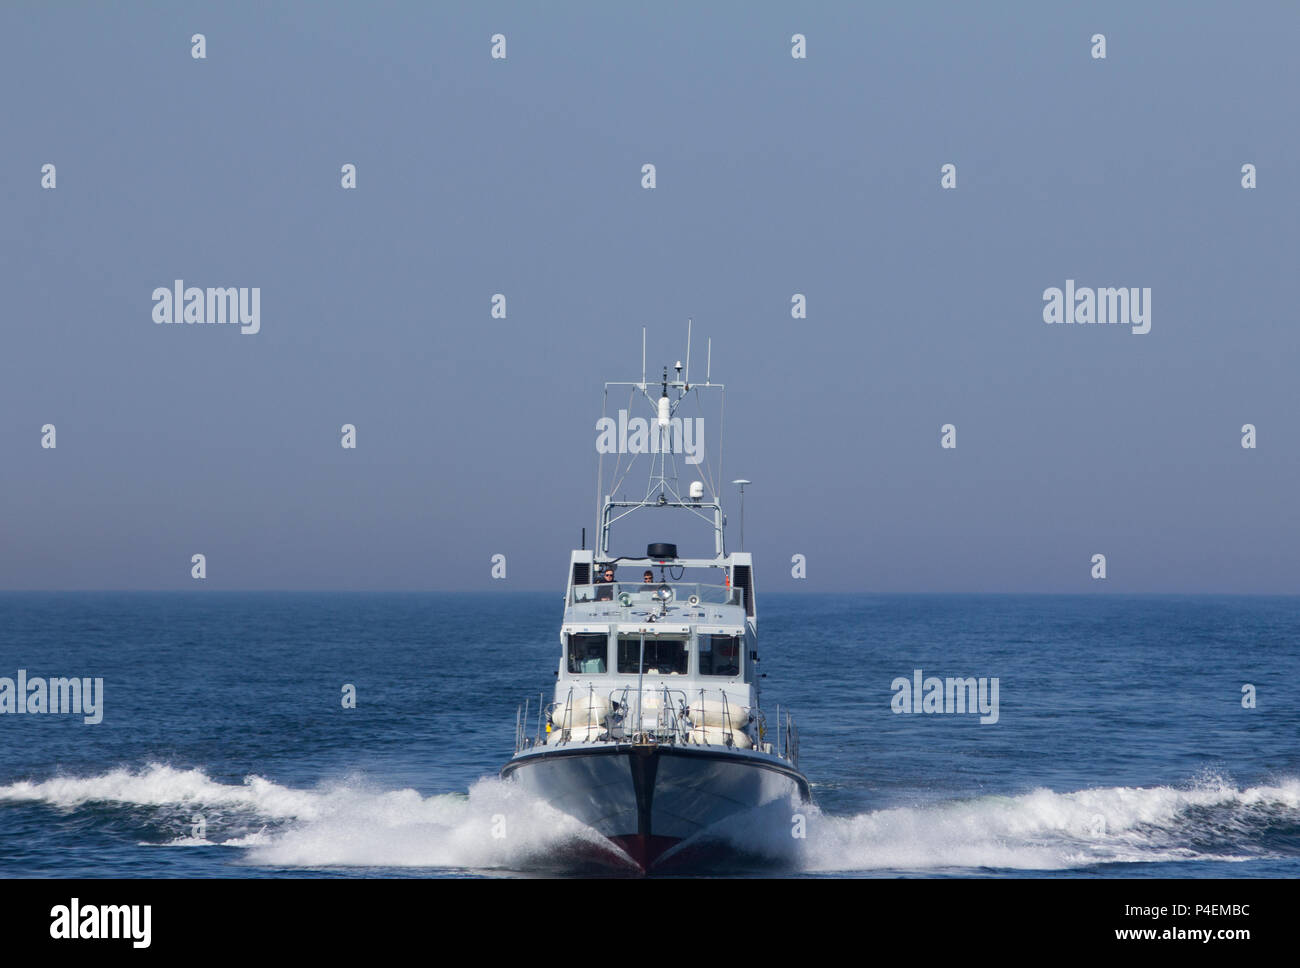 A Bow view of The Archer Class Patrol Vessel HMS Express P163, in transit in the North sea near the Baltic. Stock Photo